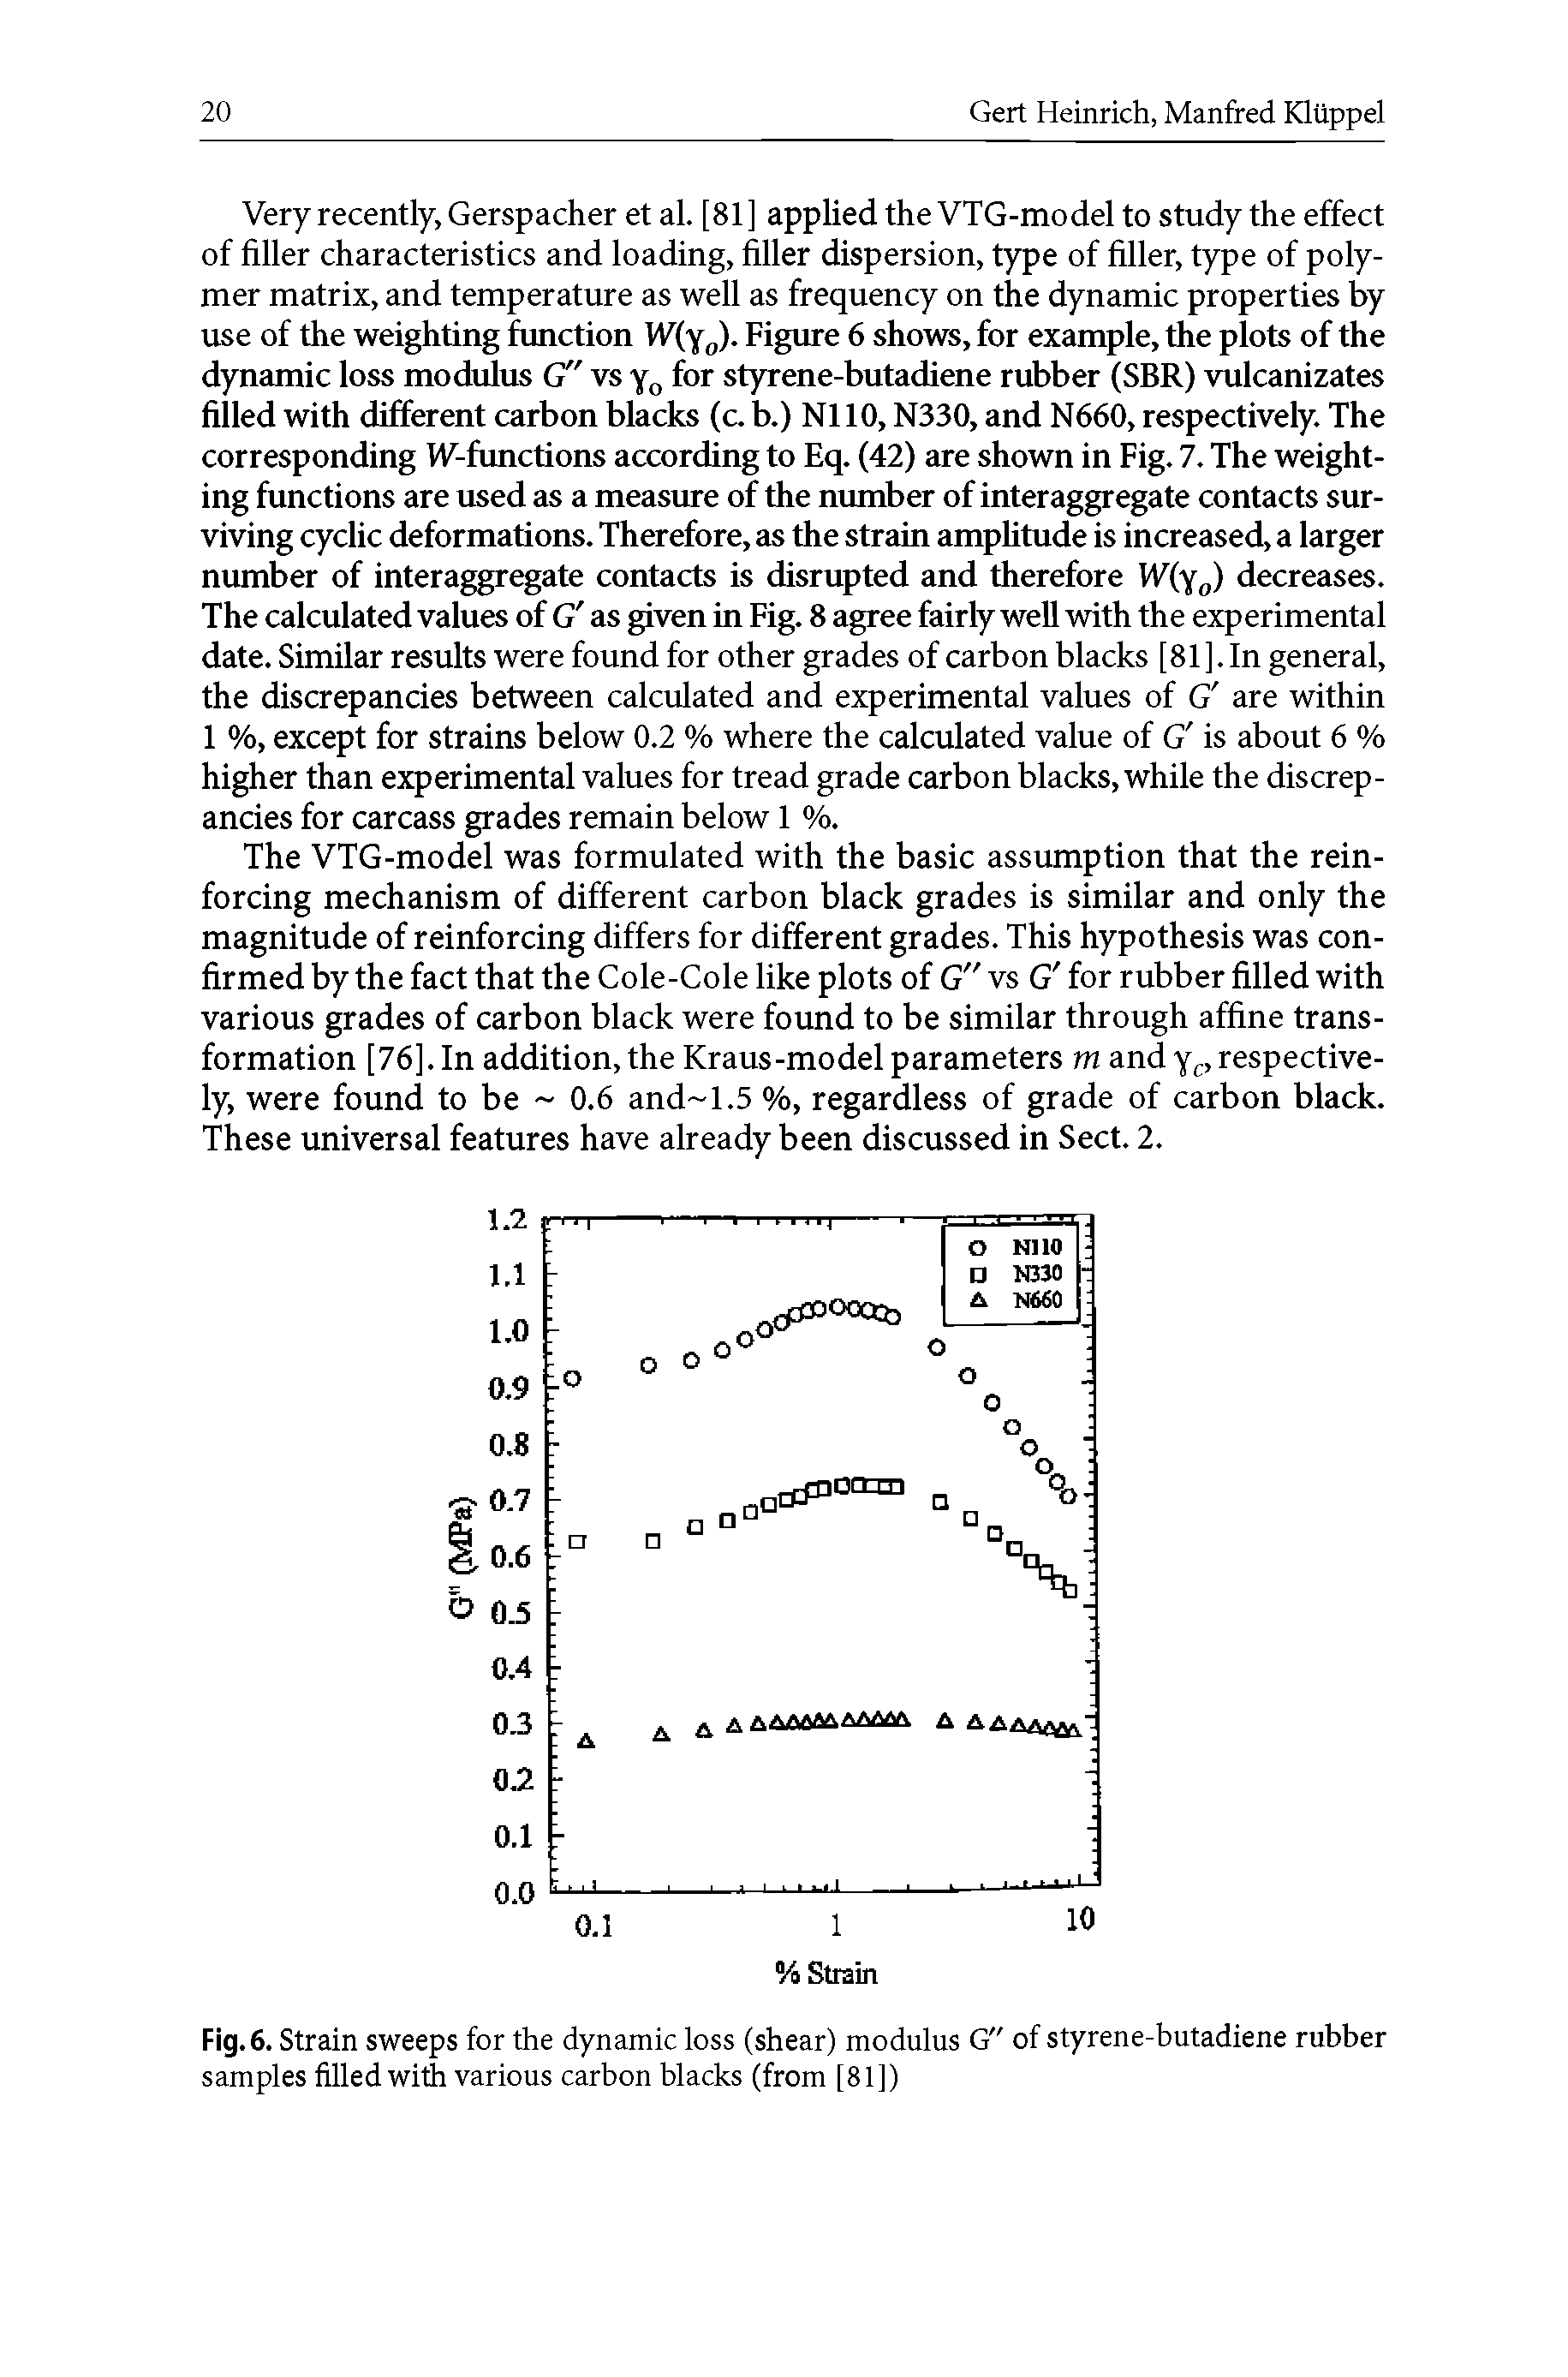 Fig. 6. Strain sweeps for the dynamic loss (shear) modulus G" of styrene-butadiene rubber samples filled with various carbon blacks (from [81])...